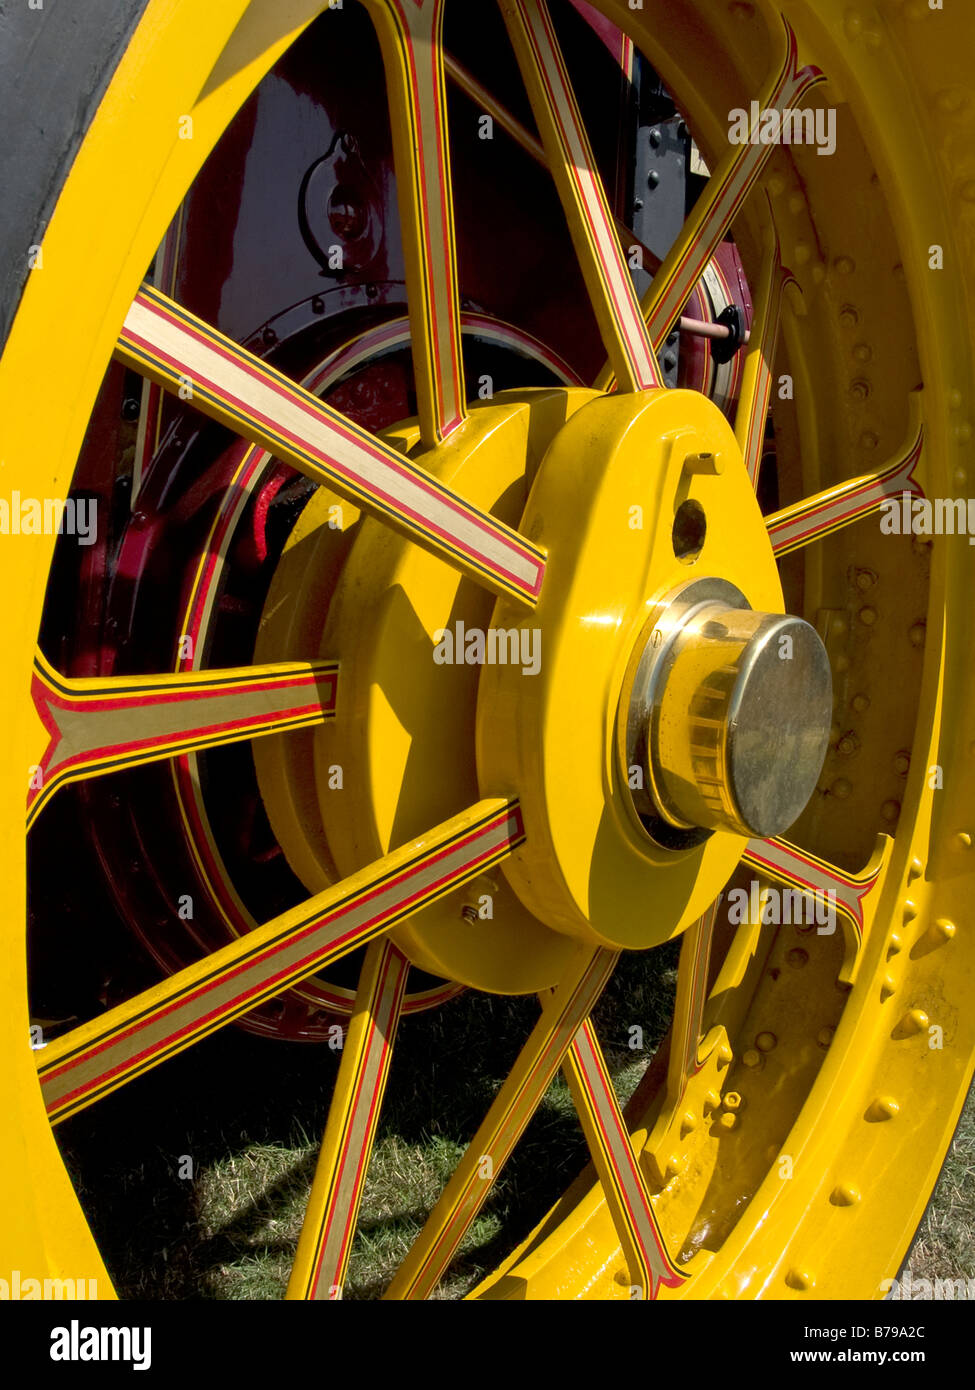 a detail of a traction engine wheel with its polished brass hub and 'lined out' paintwork Stock Photo